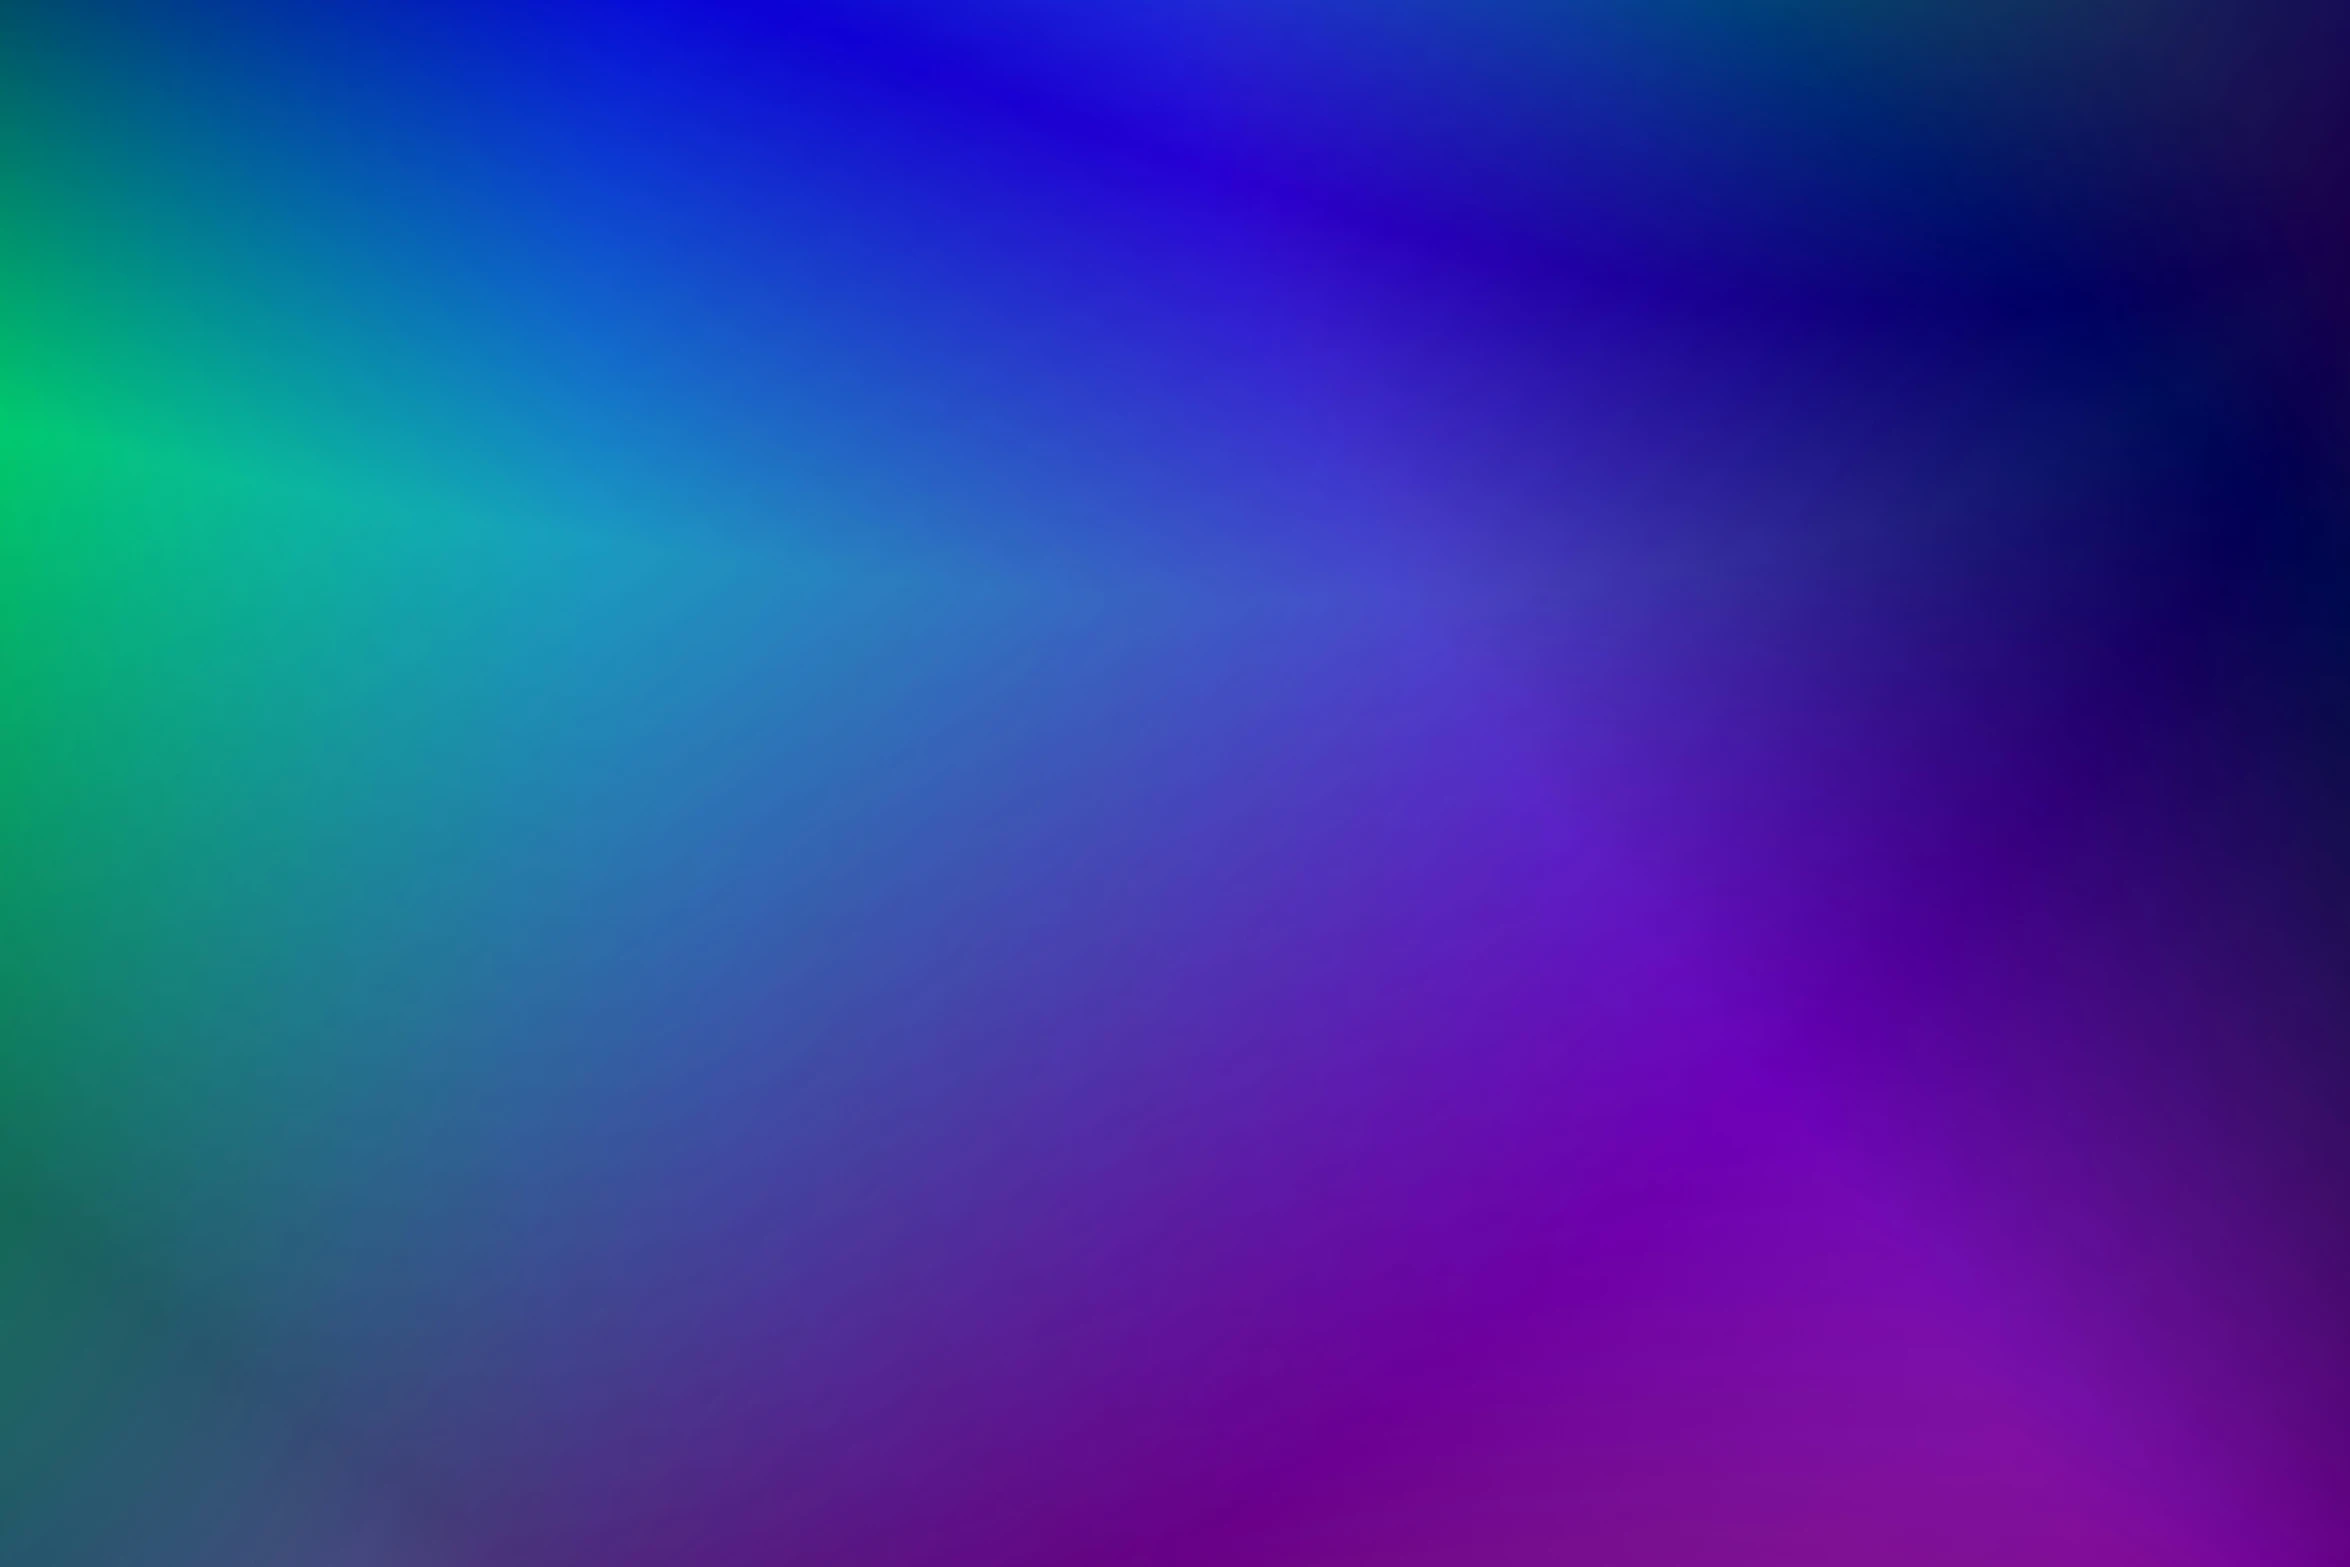 multi - color blurred image of purple, green and blue